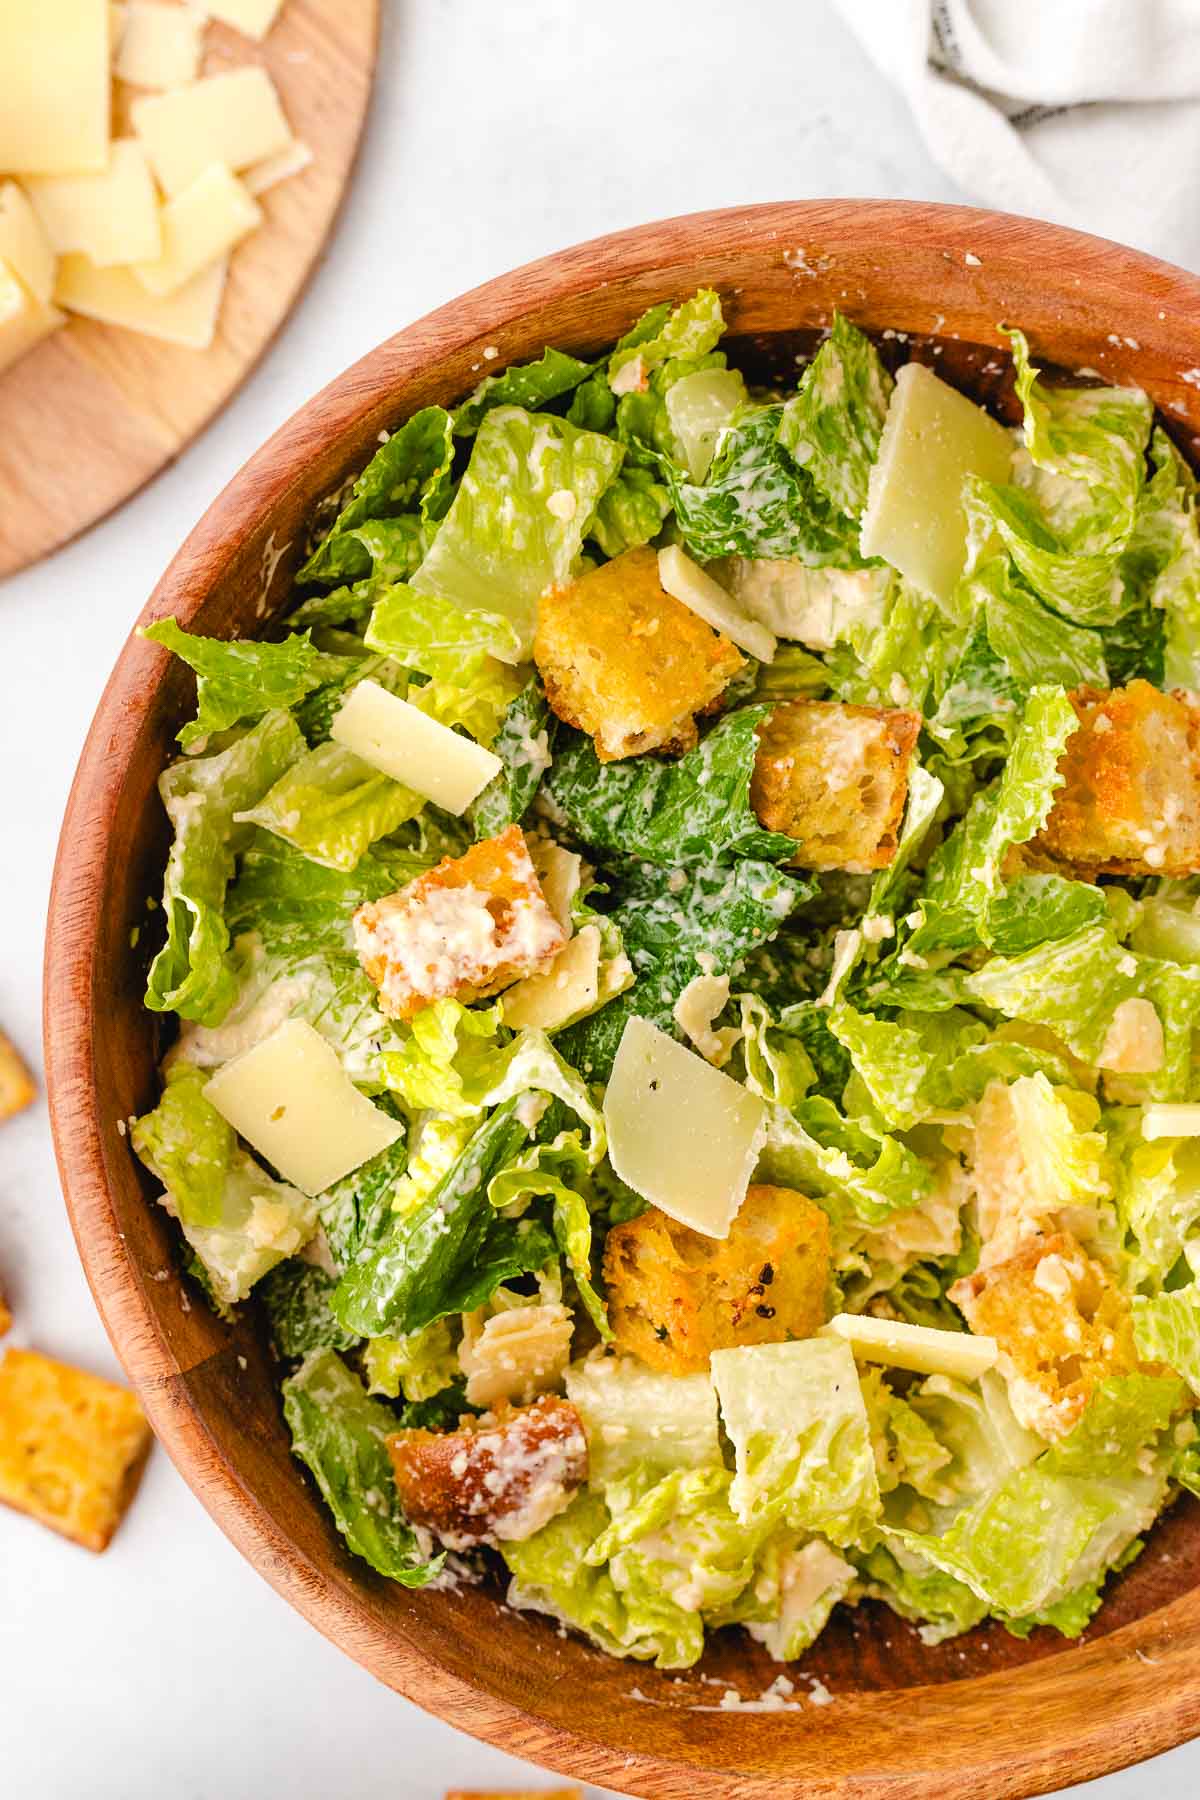 Homemade Caesar salad in a wooden bowl.